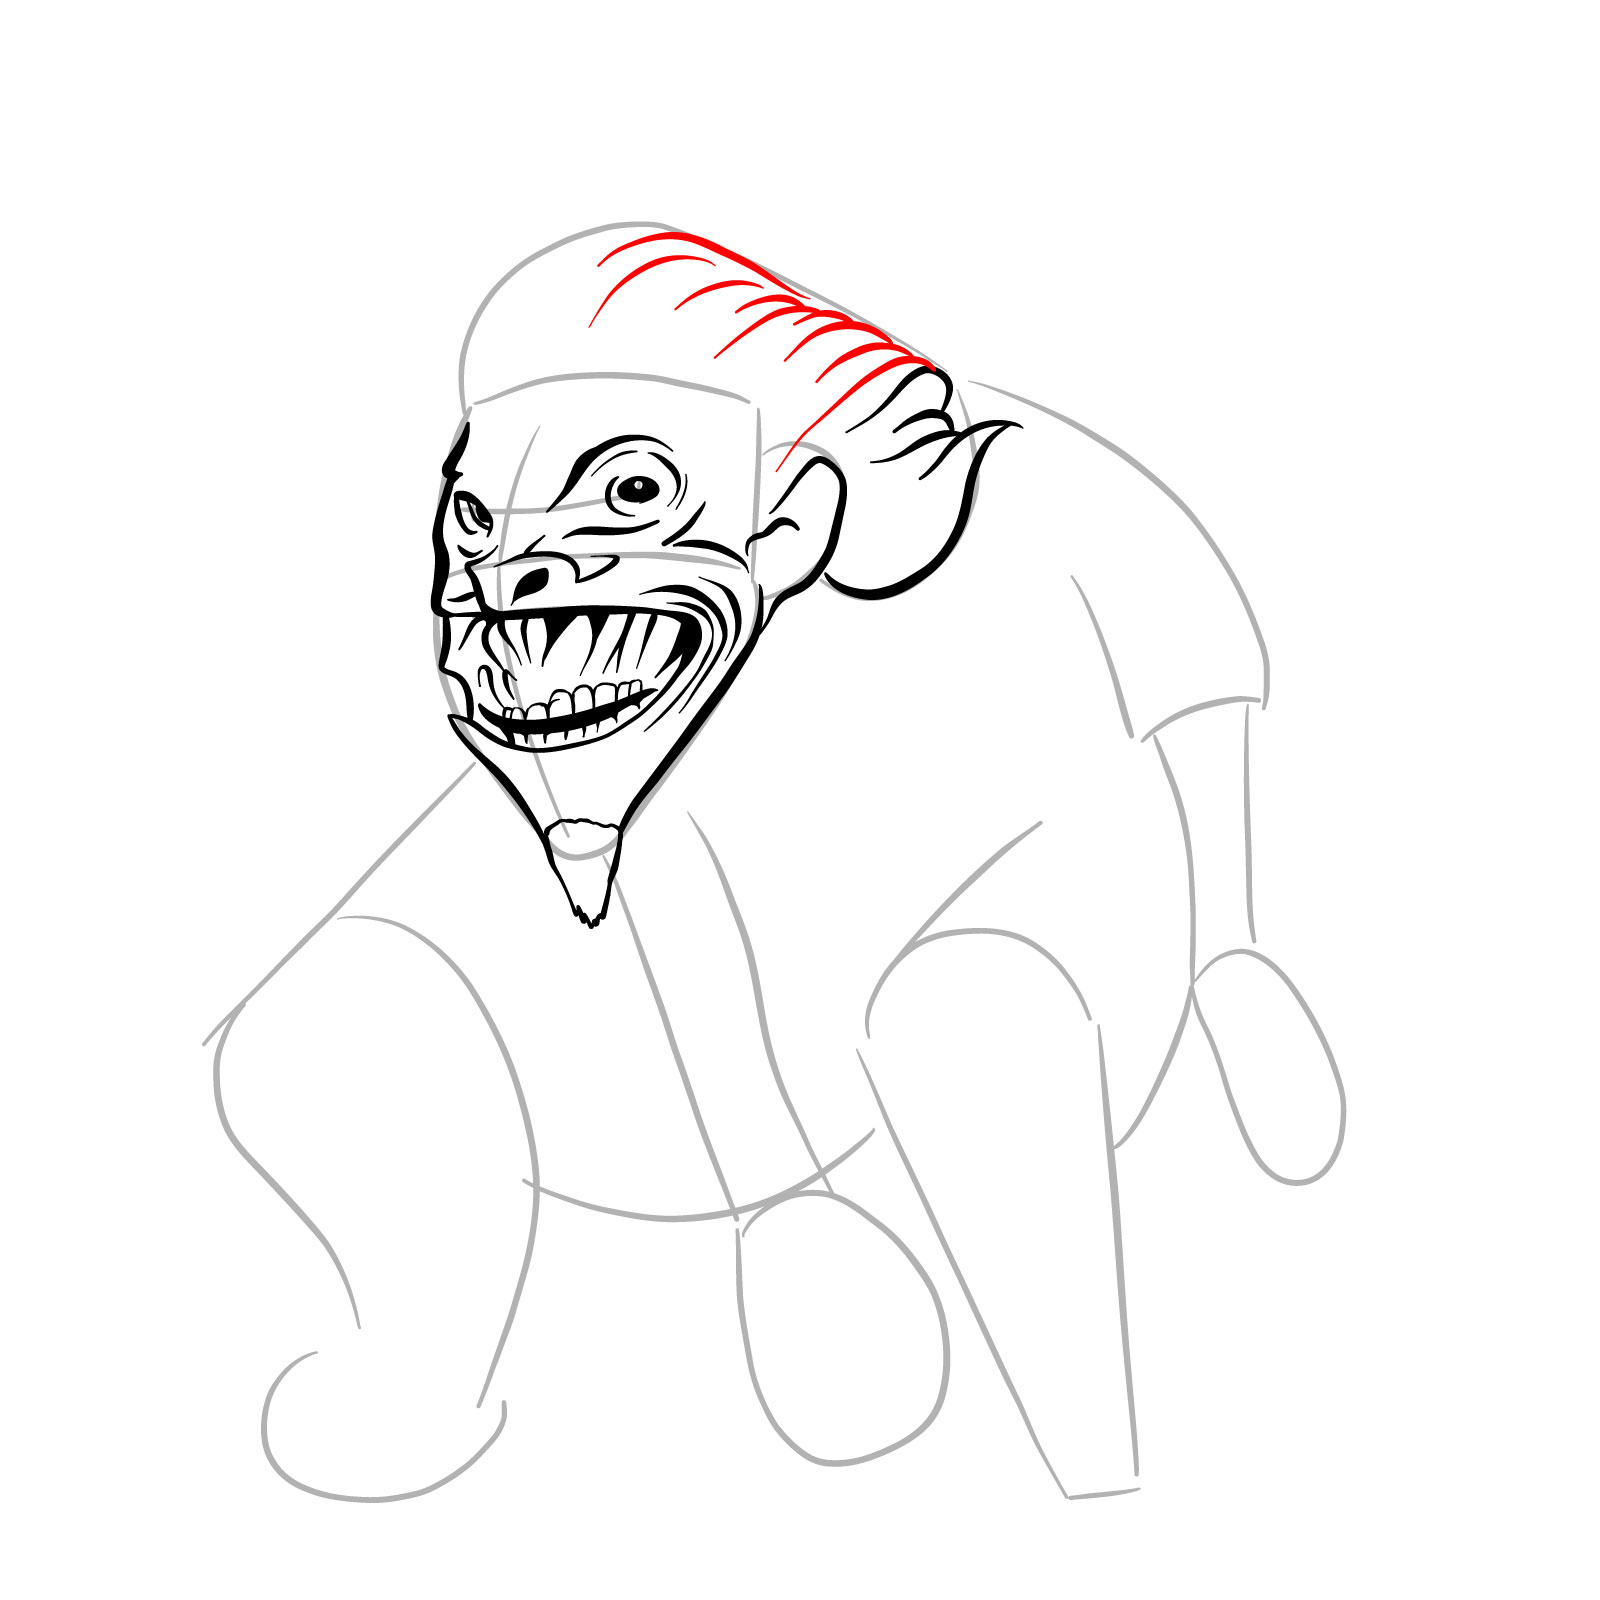 How to draw a Boggart - step 14